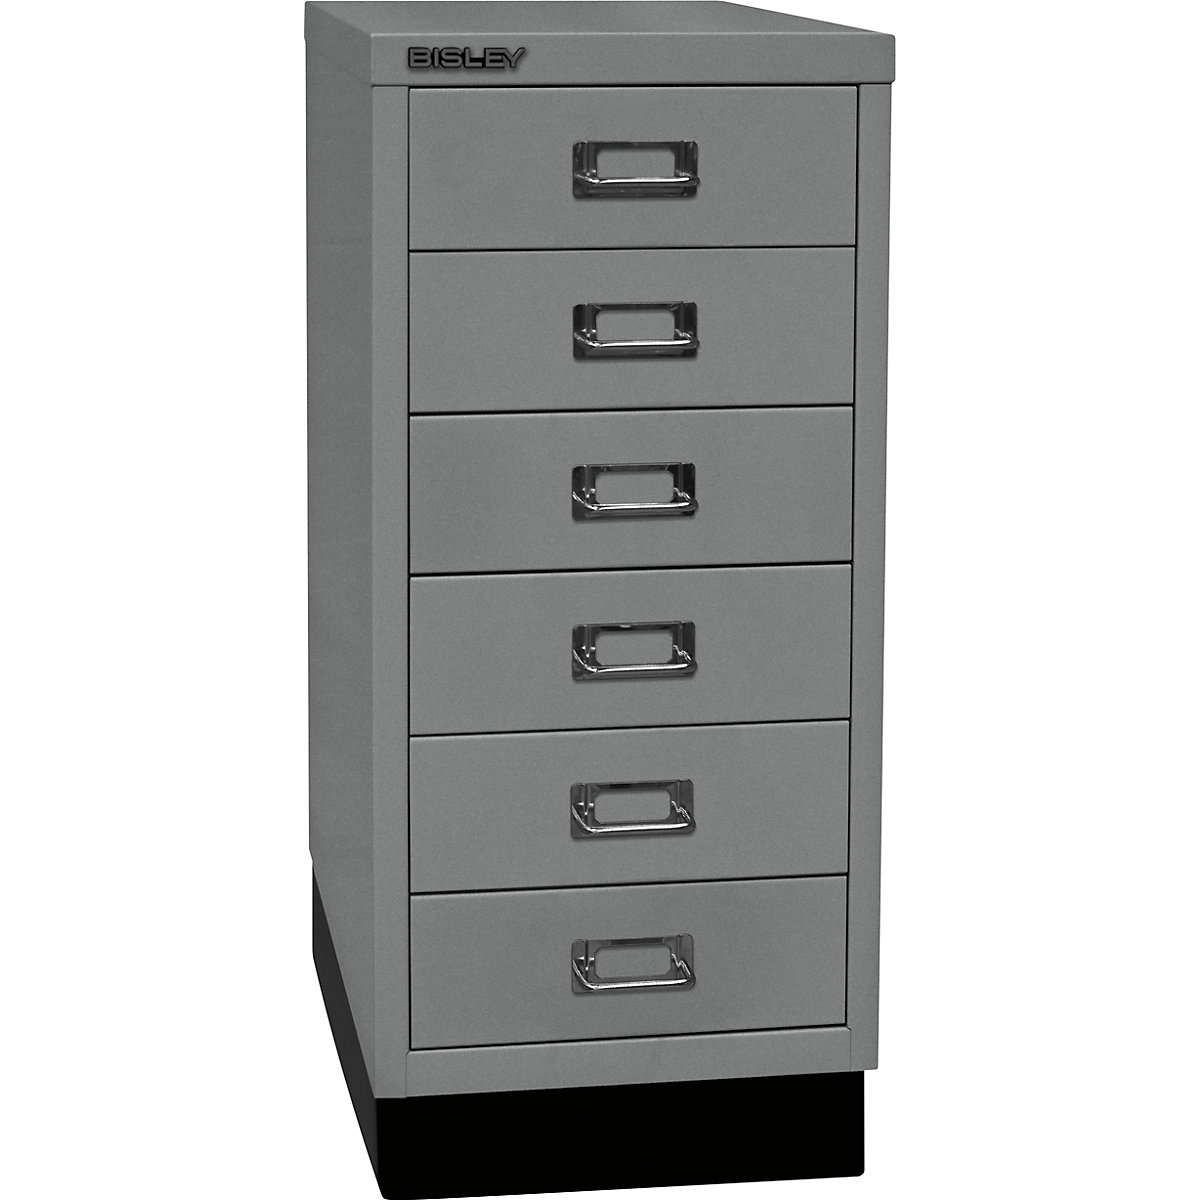 MultiDrawer™ 29 series – BISLEY, with plinth, A4, 6 drawers, silver-6